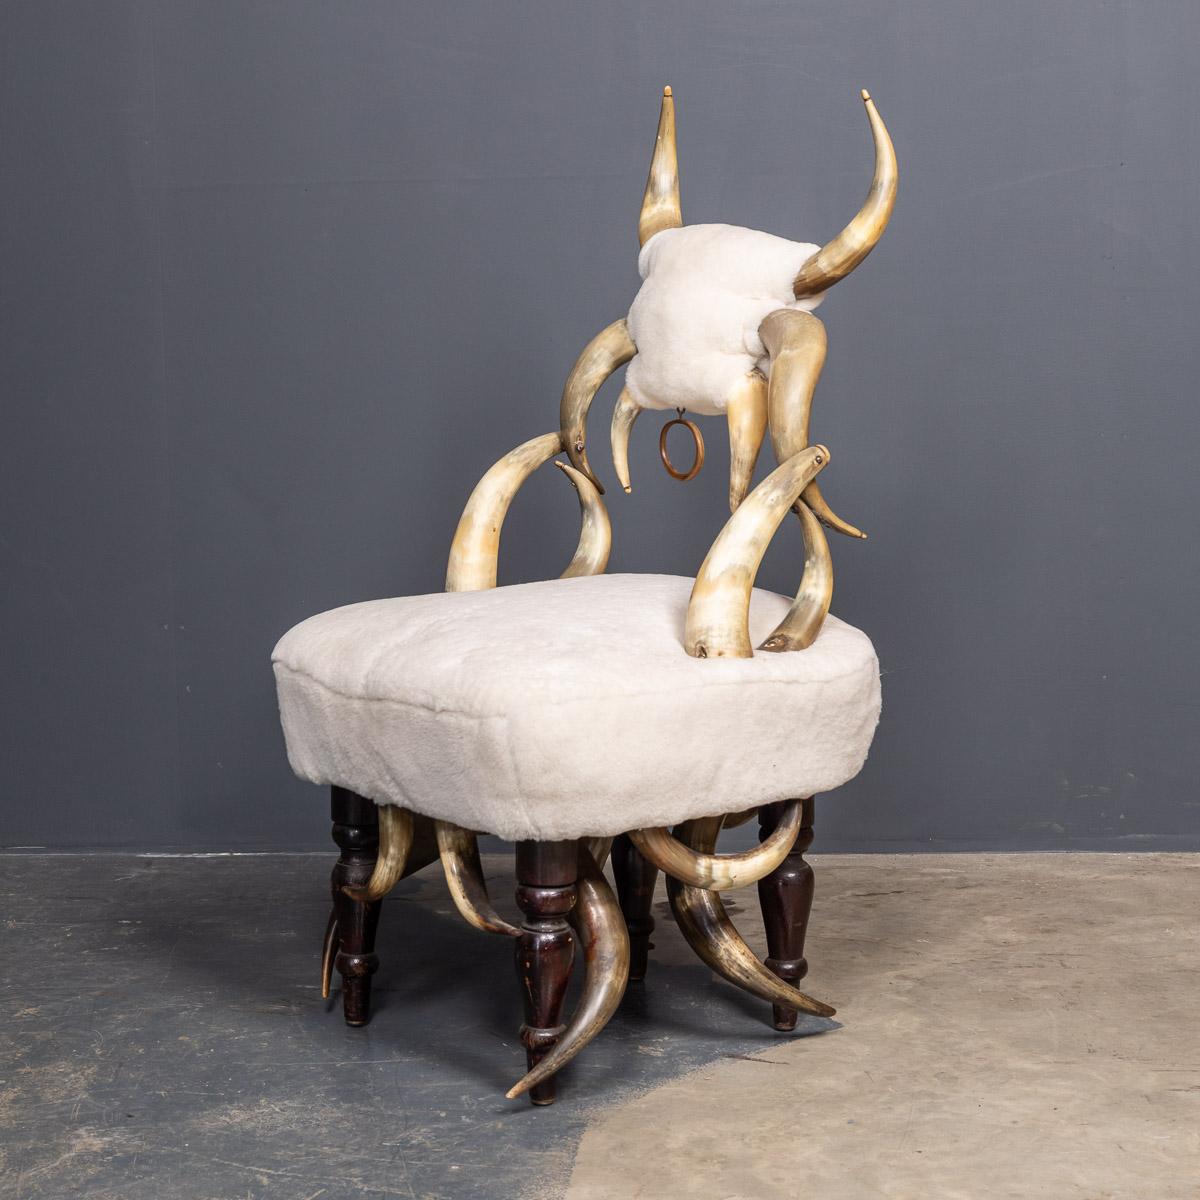 Antique 19th century very unusual hall chairs fashioned from bull horns. These chairs are usually from the Swiss / German borders (the Black Forest) and we a fashionable home decoration accessory in the latter part of the 19th century. Much of this